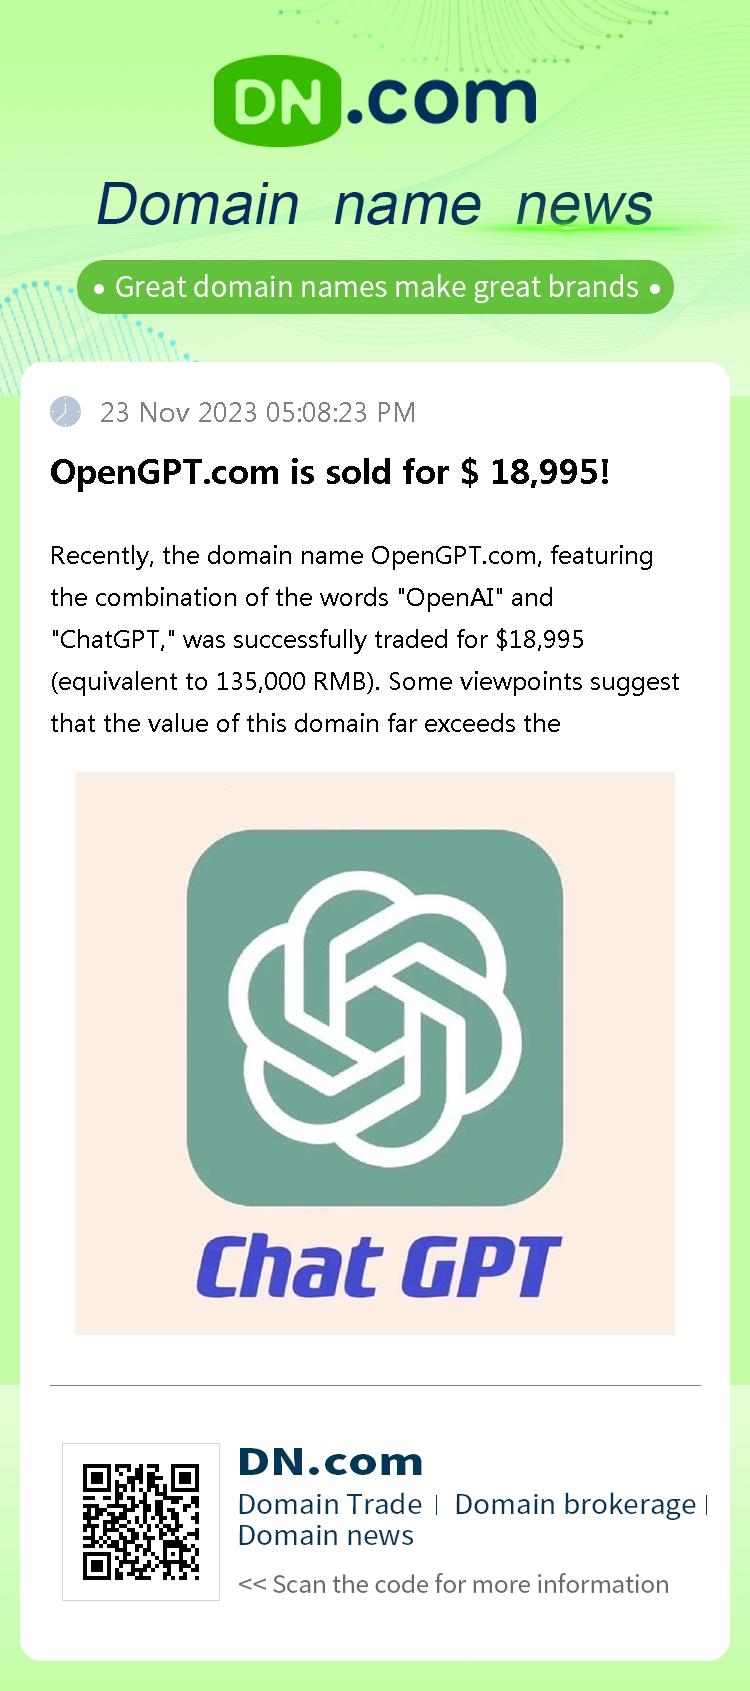 OpenGPT.com is sold for $ 18,995!